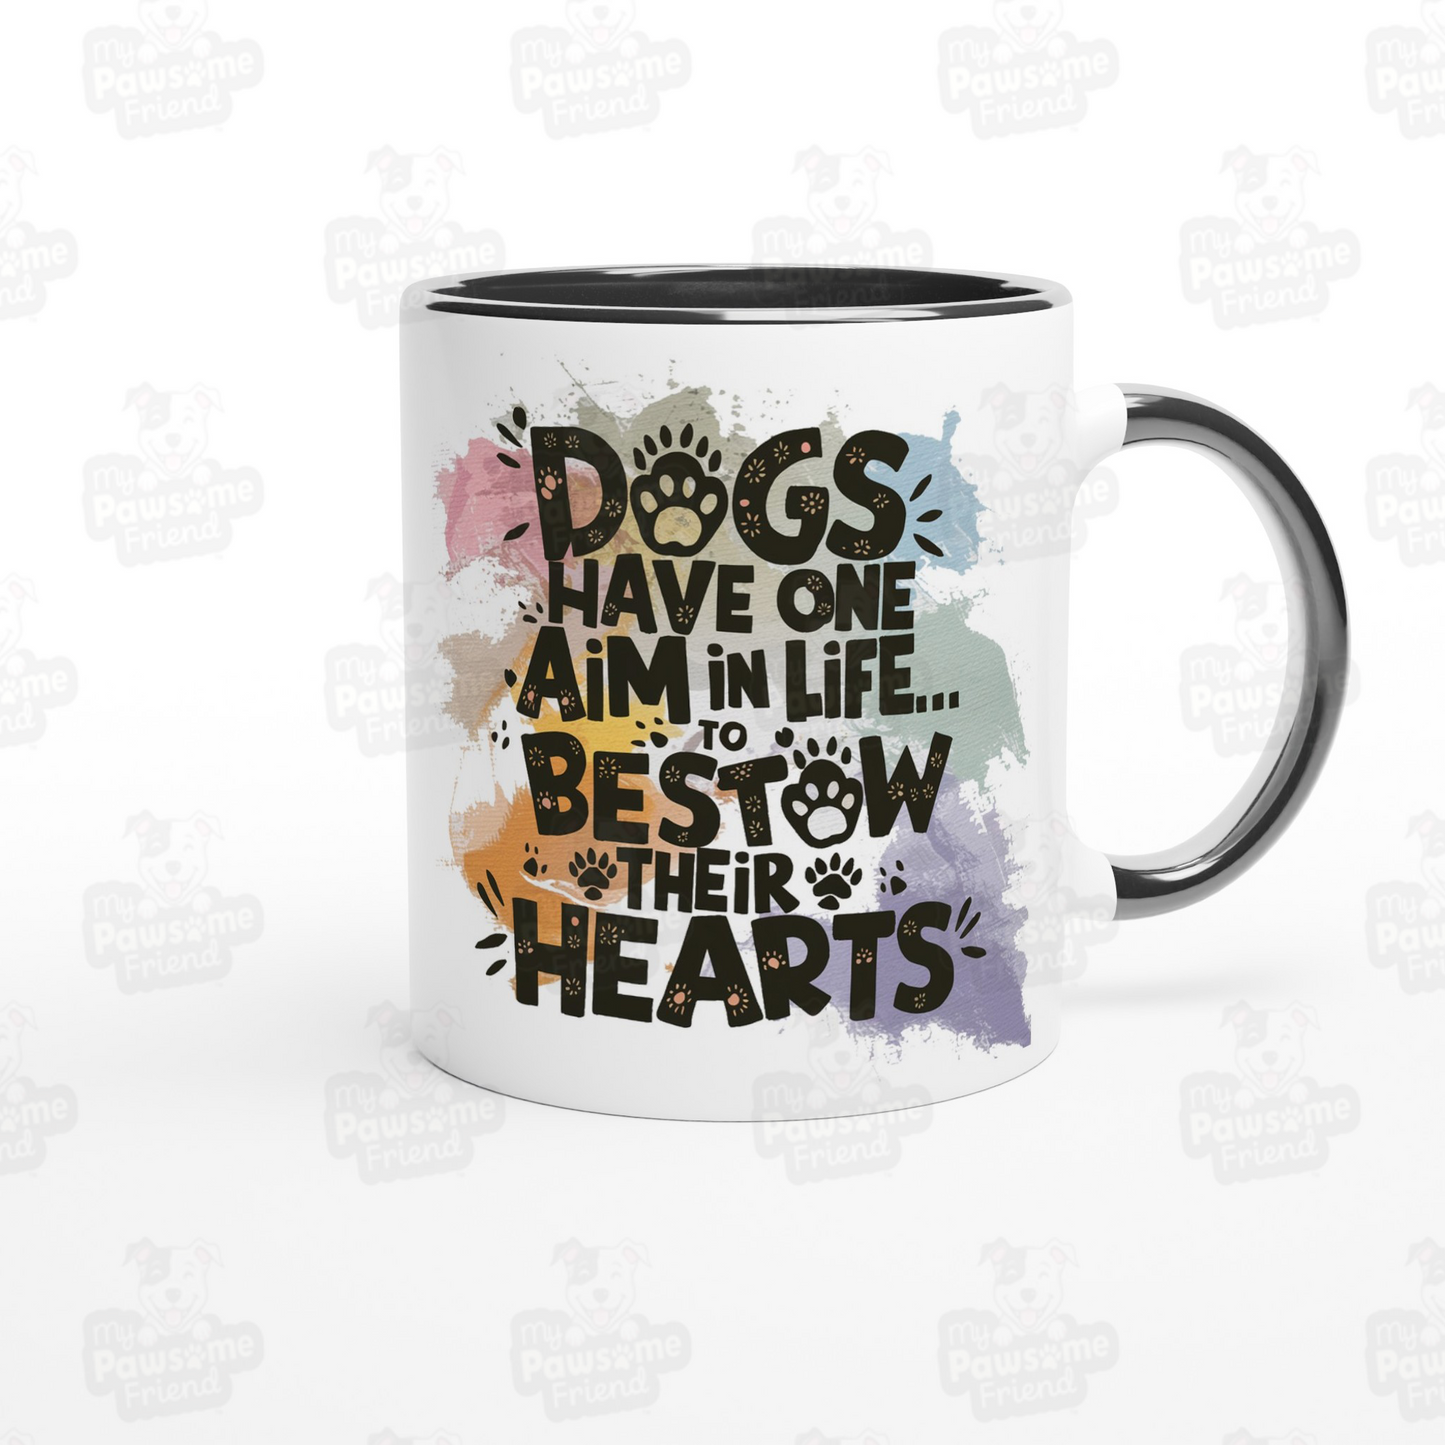 Side view of a ceramic coffee mug with a beautiful splash color design with the phrase: "Dogs Have One Aim in Life... To Bestow Their Hearts". The handle and inside of the coffee mug is black